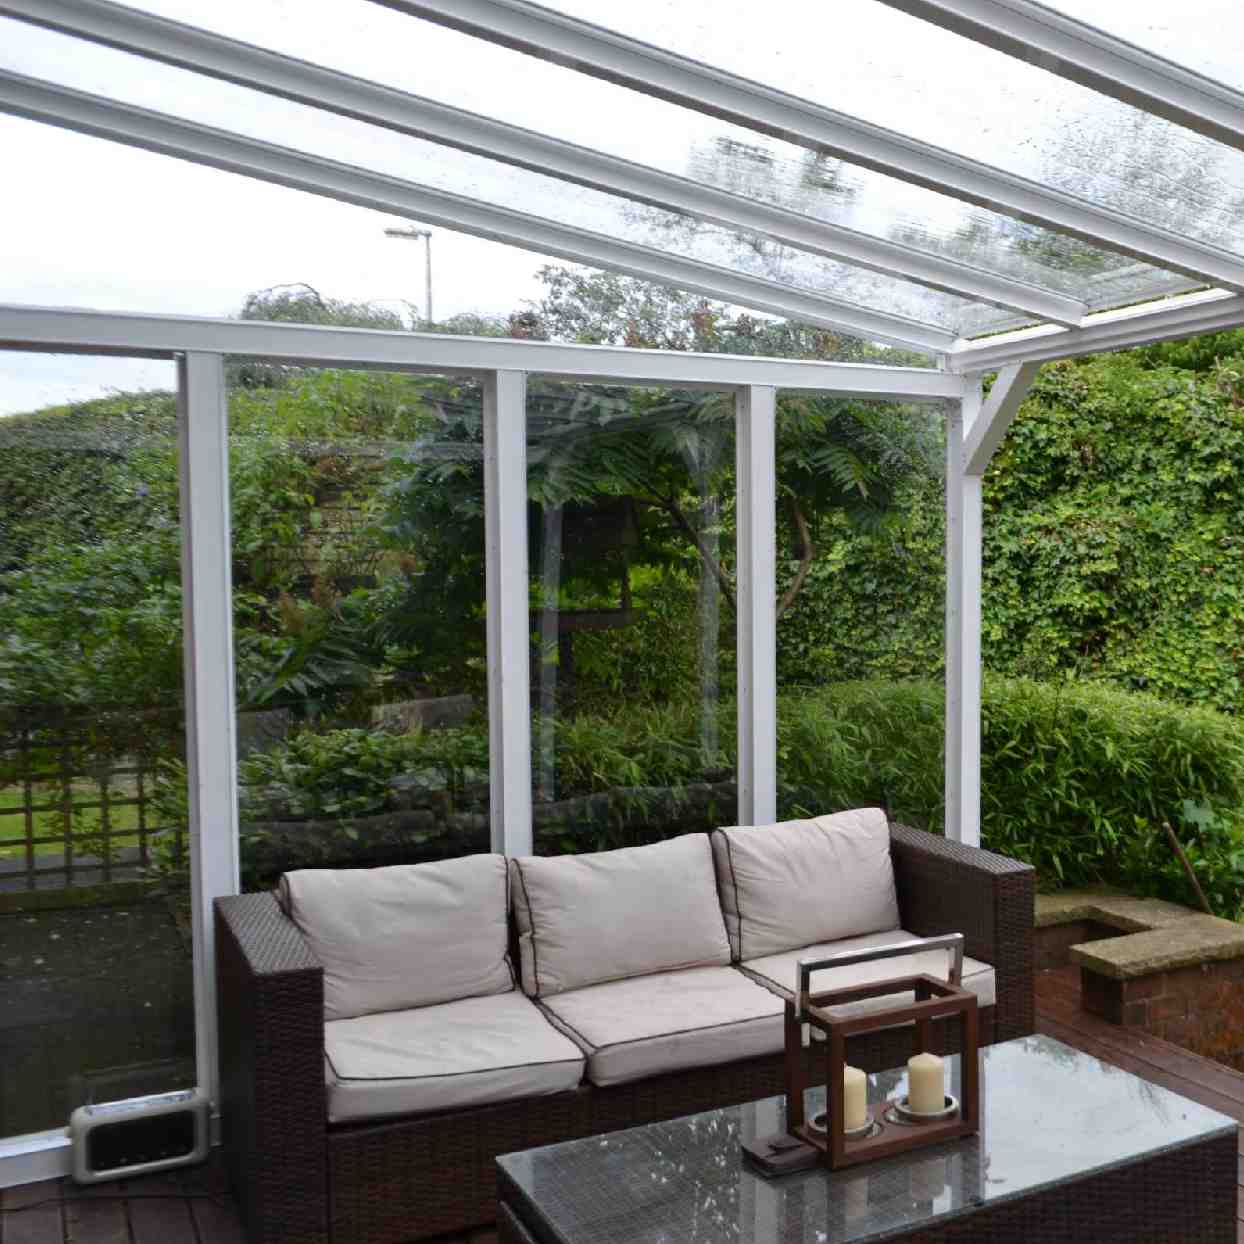 Buy Omega Verandah White with 16mm Polycarbonate Glazing - 7.0m (W) x 3.5m (P), (4) Supporting Posts online today